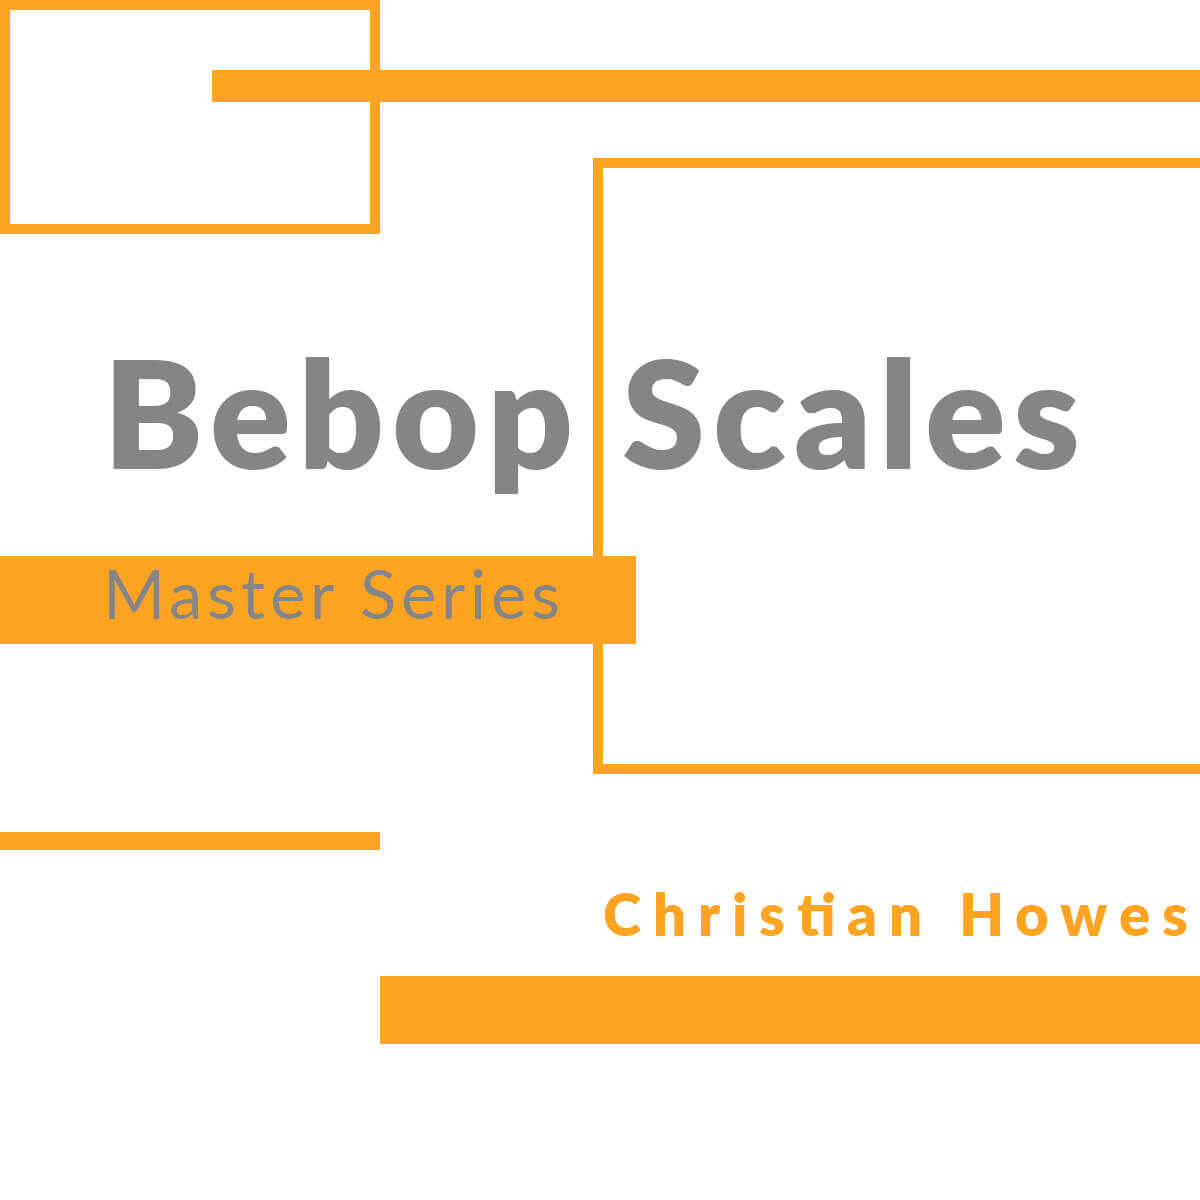 Bebop Scales Master Series (Video Series + Additional Materials)